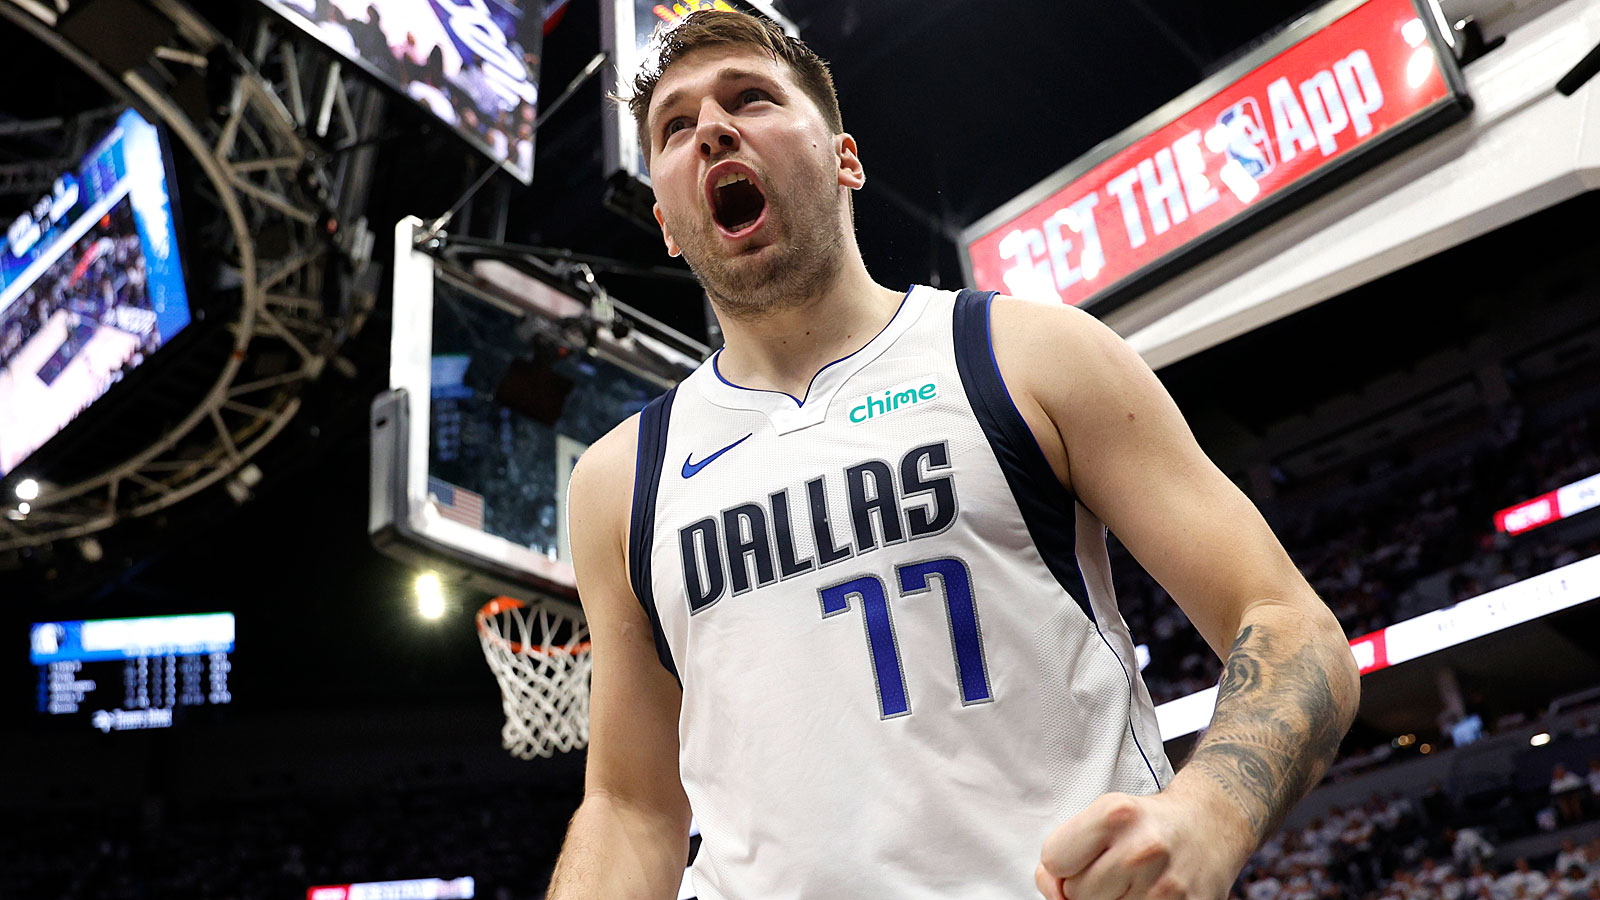 Luka Doncic leads the Mavericks to the Finals for the primary time since Dirk Nowitzki in 2011.